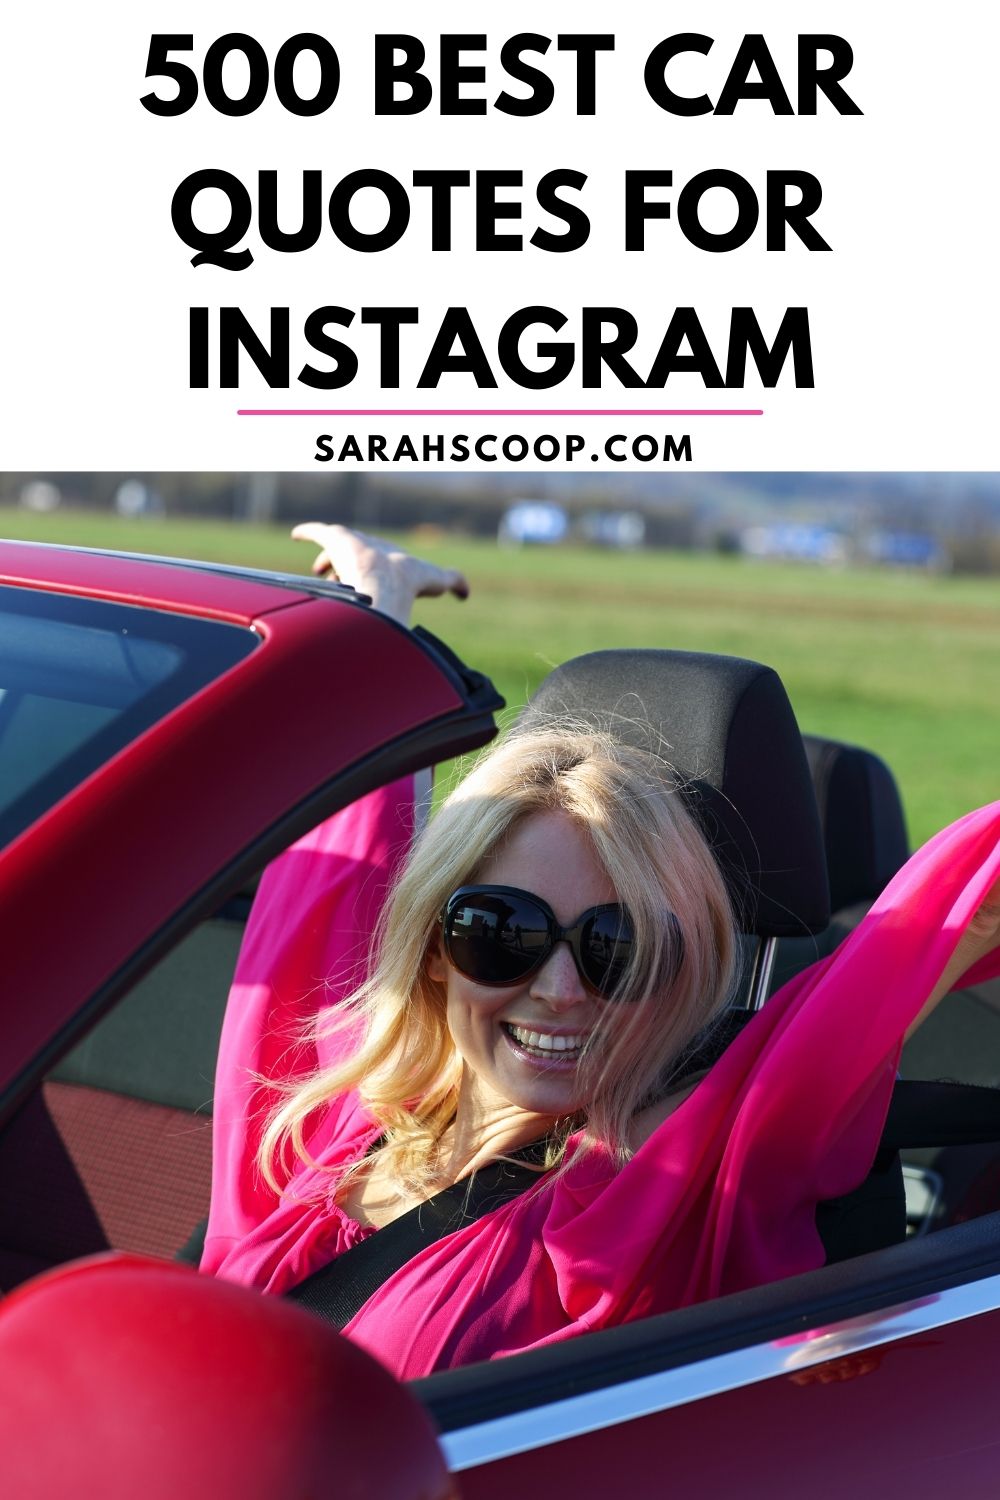 Top 500 Best Car Quotes For Instagram - Cool and Funny Captions - Sarah  Scoop